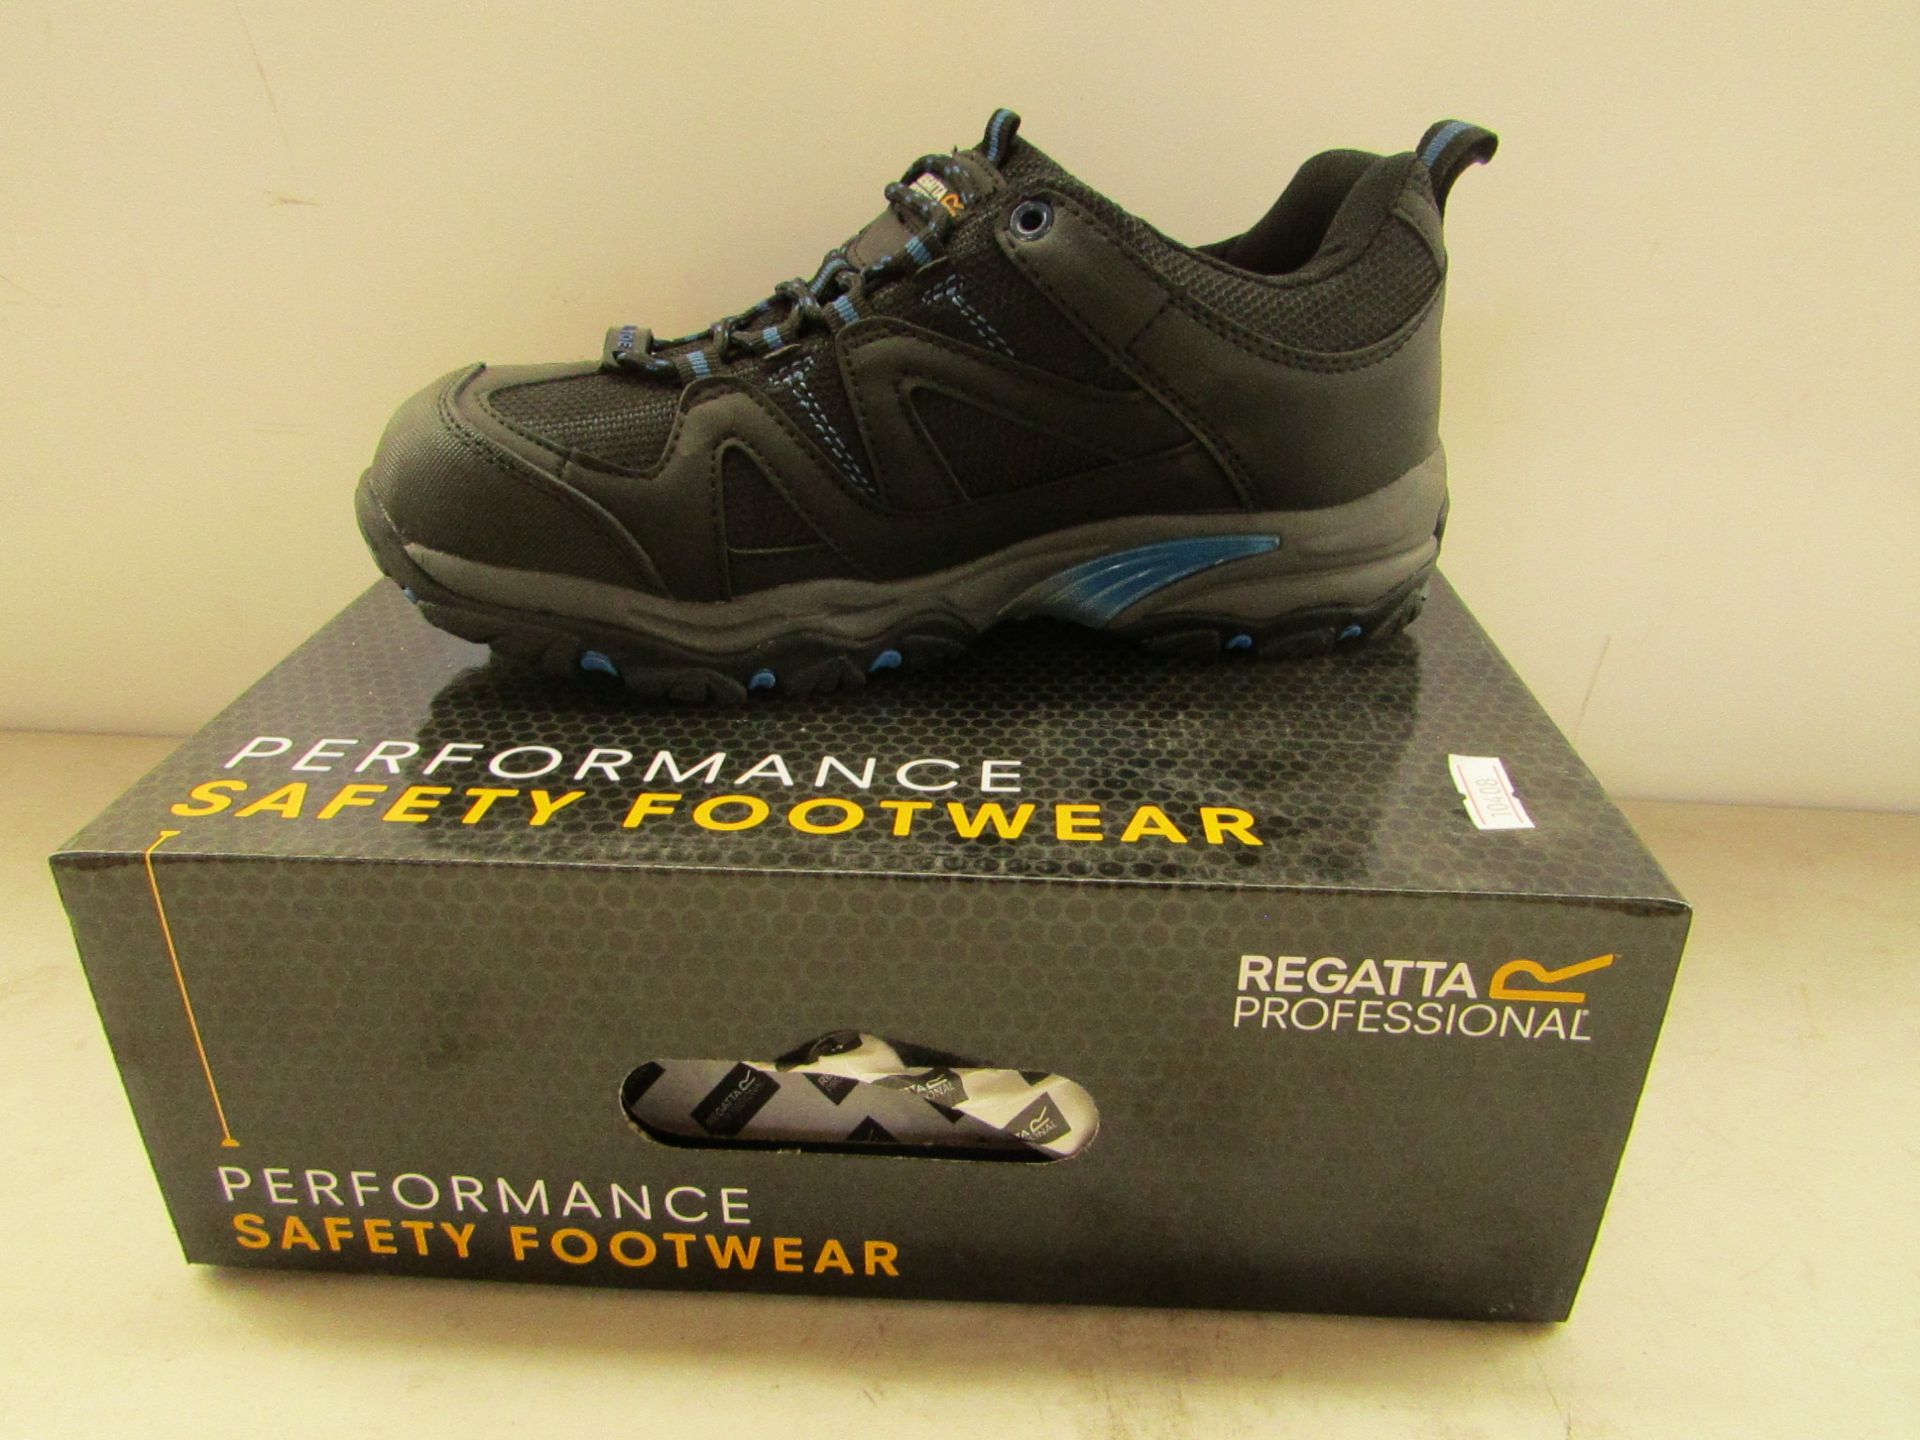 Regatta Professional Riverbeck steel toe cap safety trainers (Black and Blue colour), size UK7,